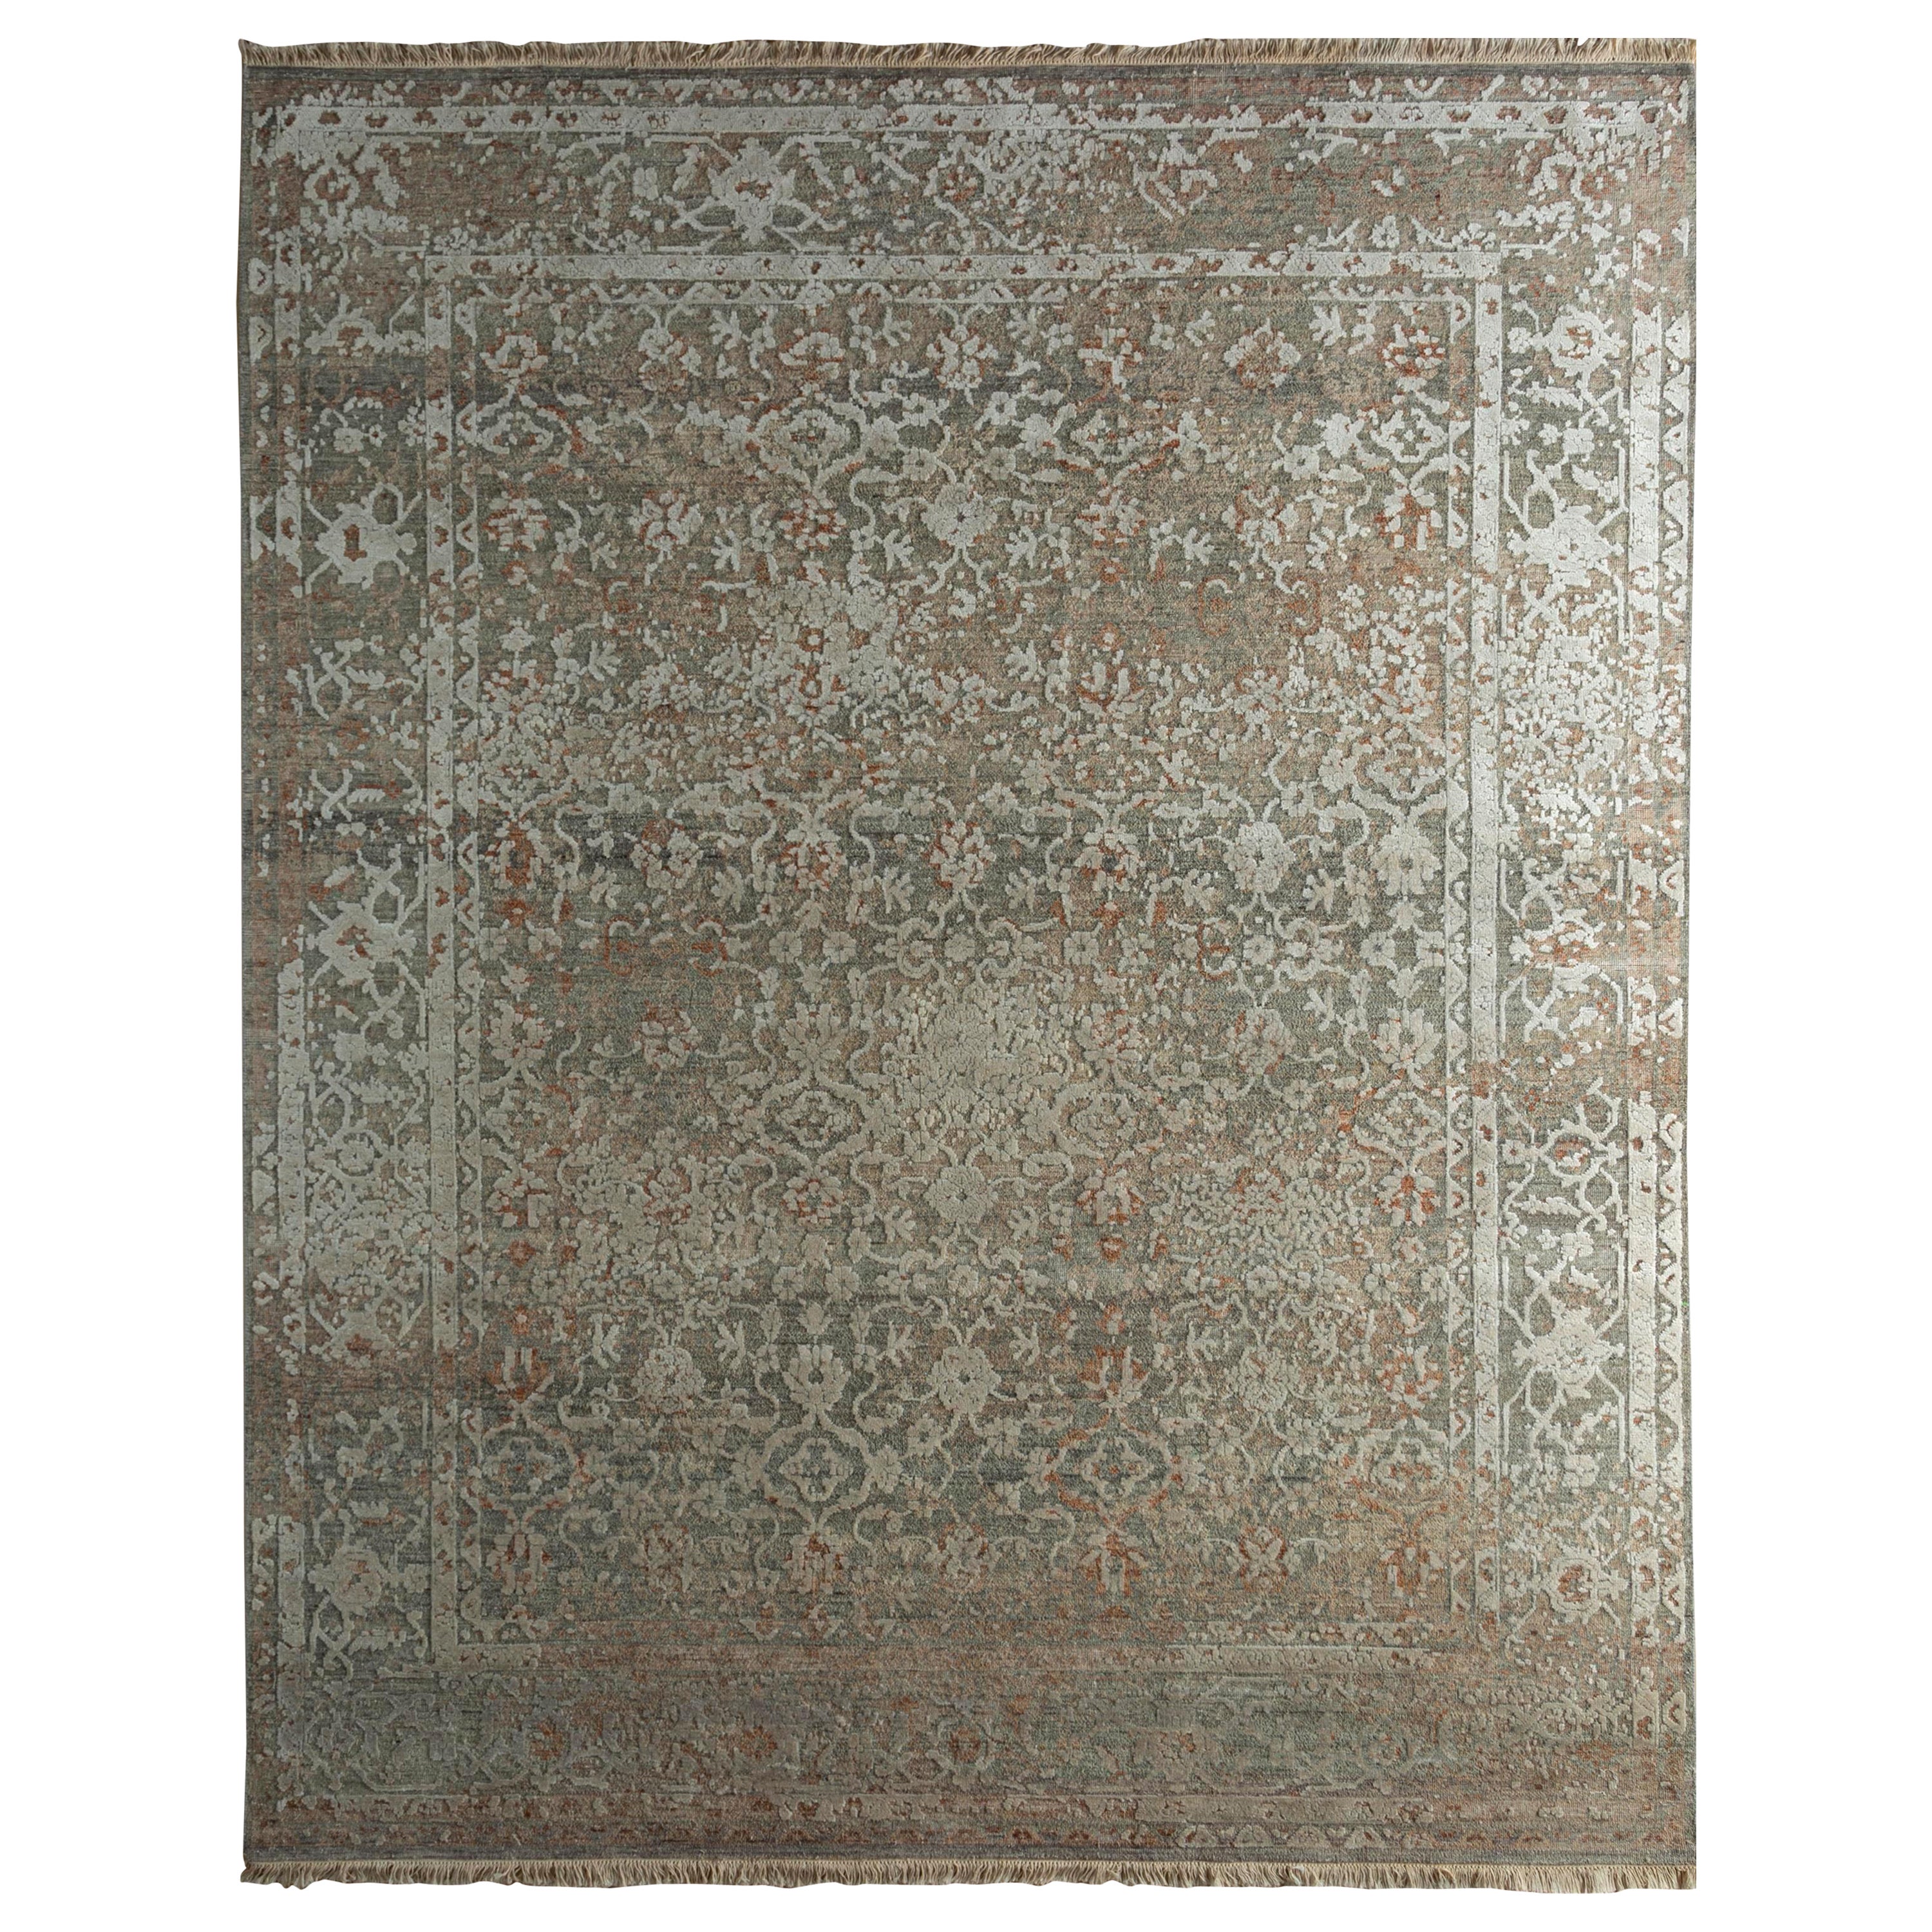 Ethereal Elegance Medium Taupe & Flax 240X300 Cm Handknotted Rug For Sale